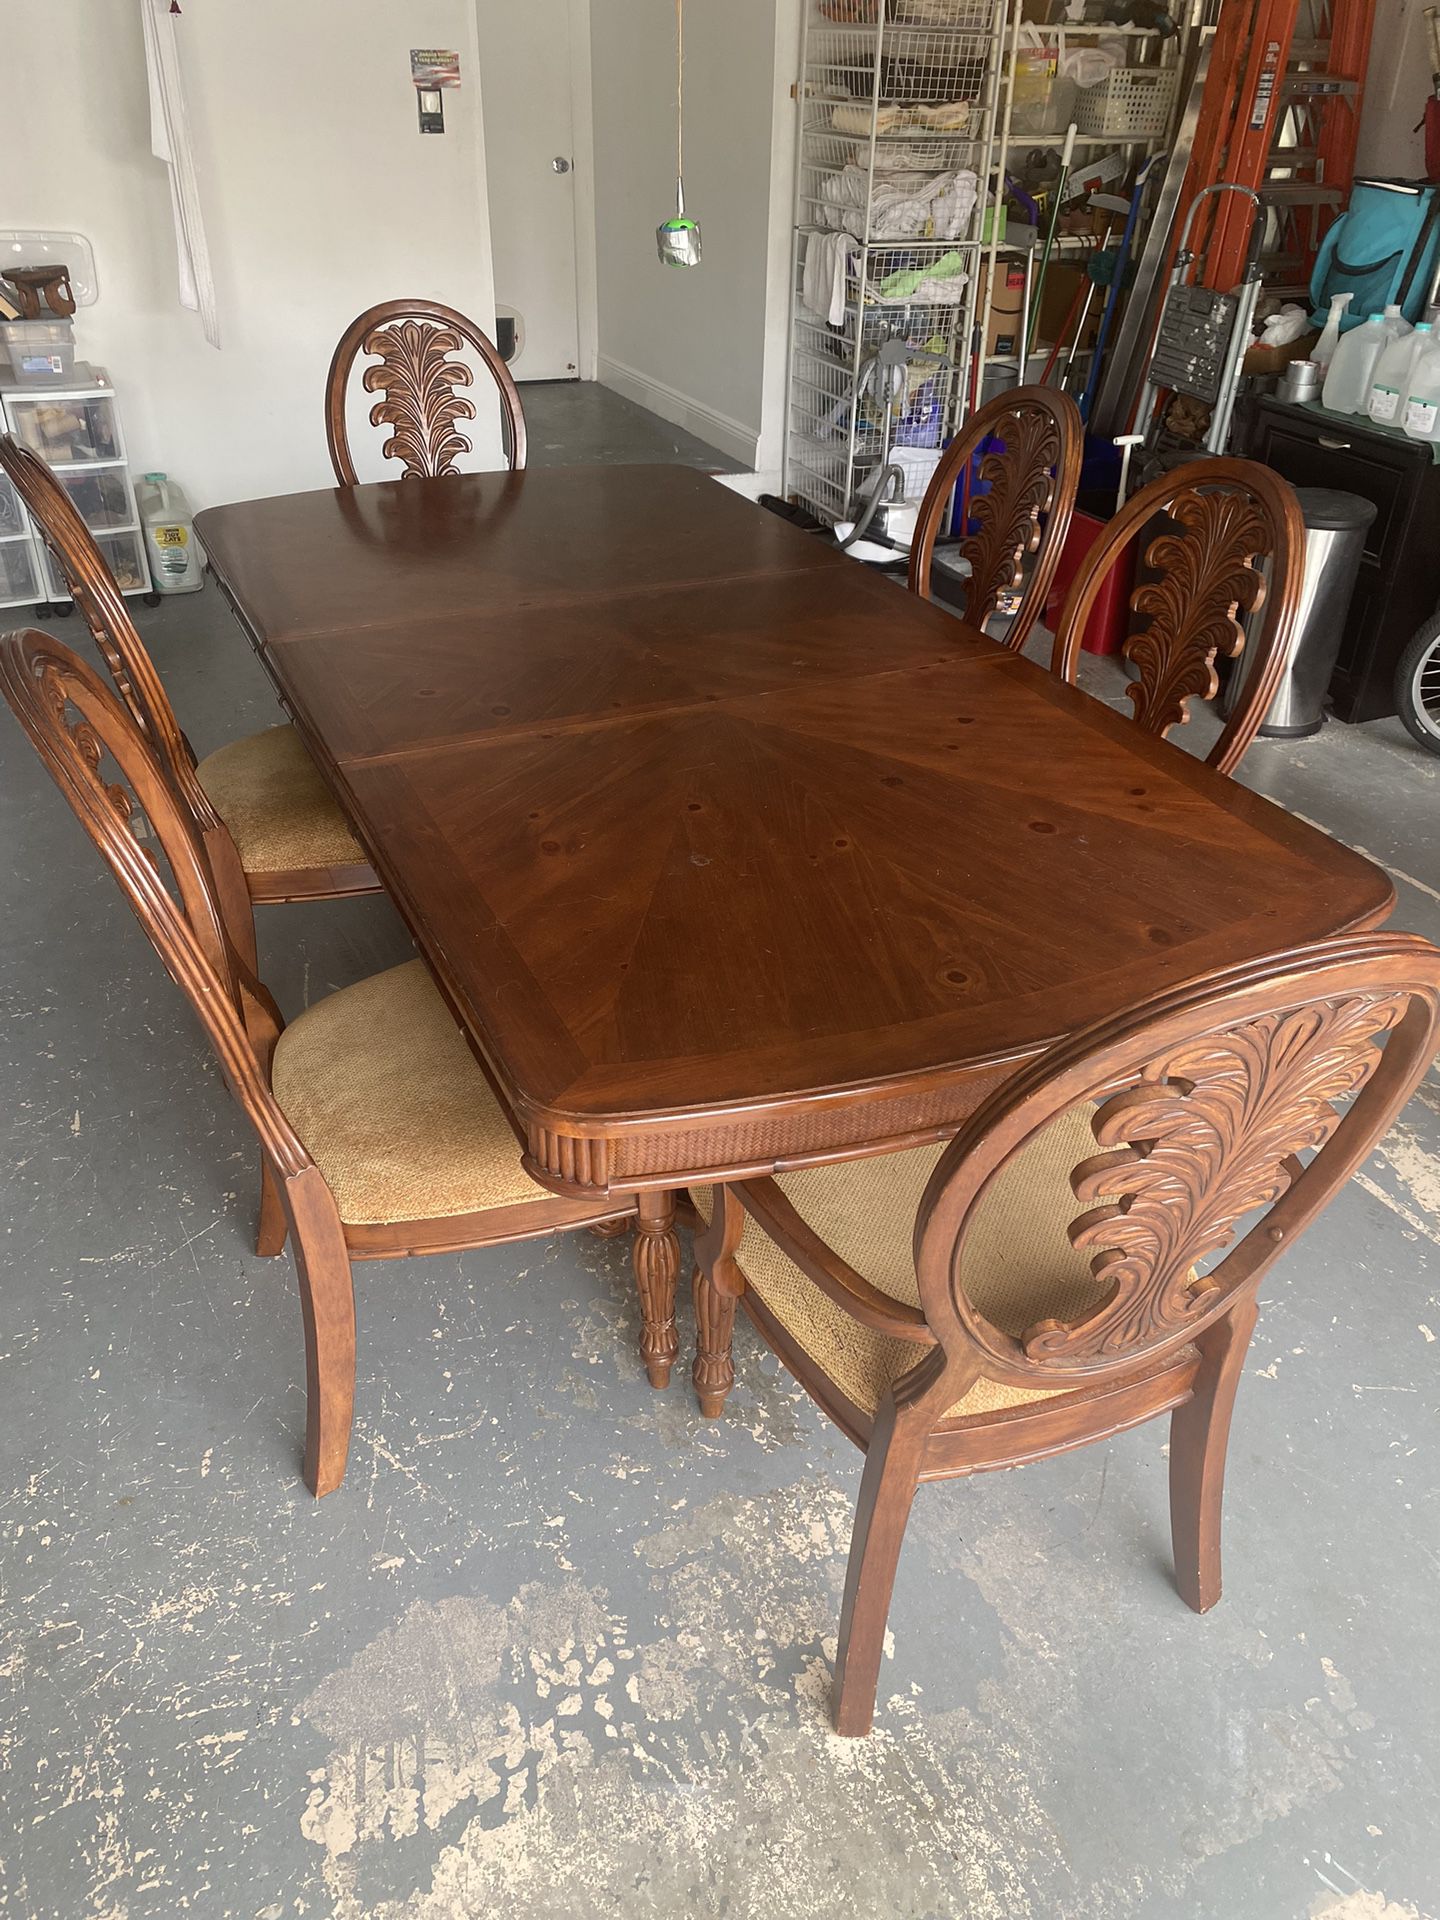 Dining Table 6 Chairs